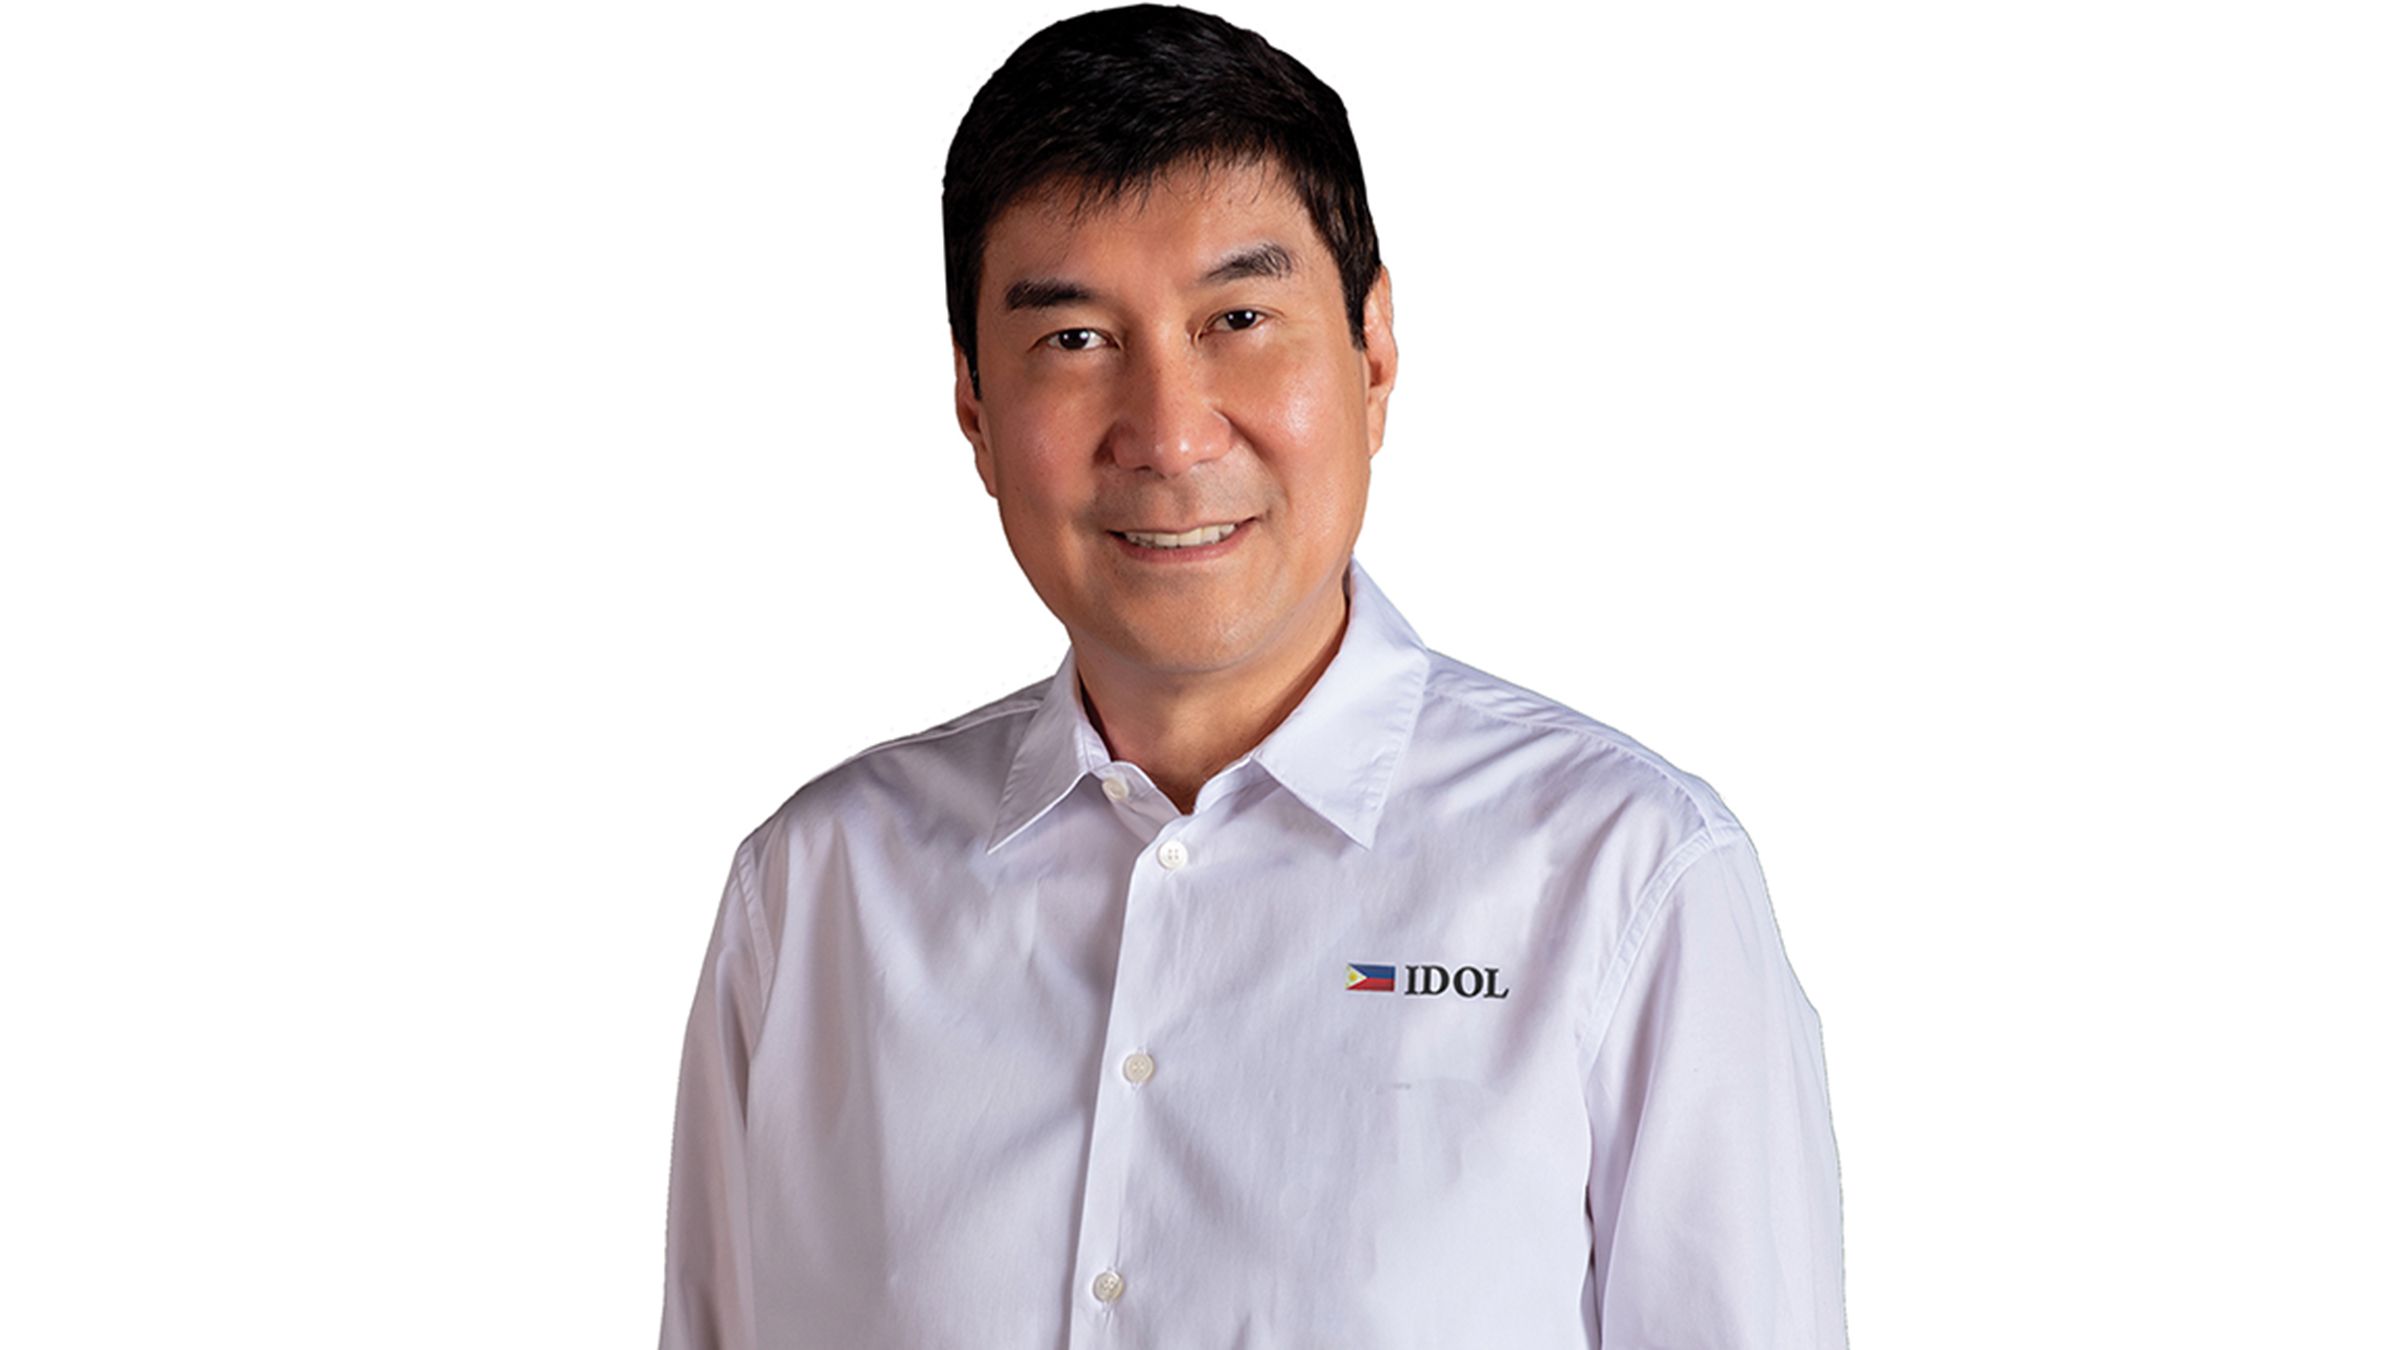 Tulfo vows to push for lifelong care of kids, adults with special needs